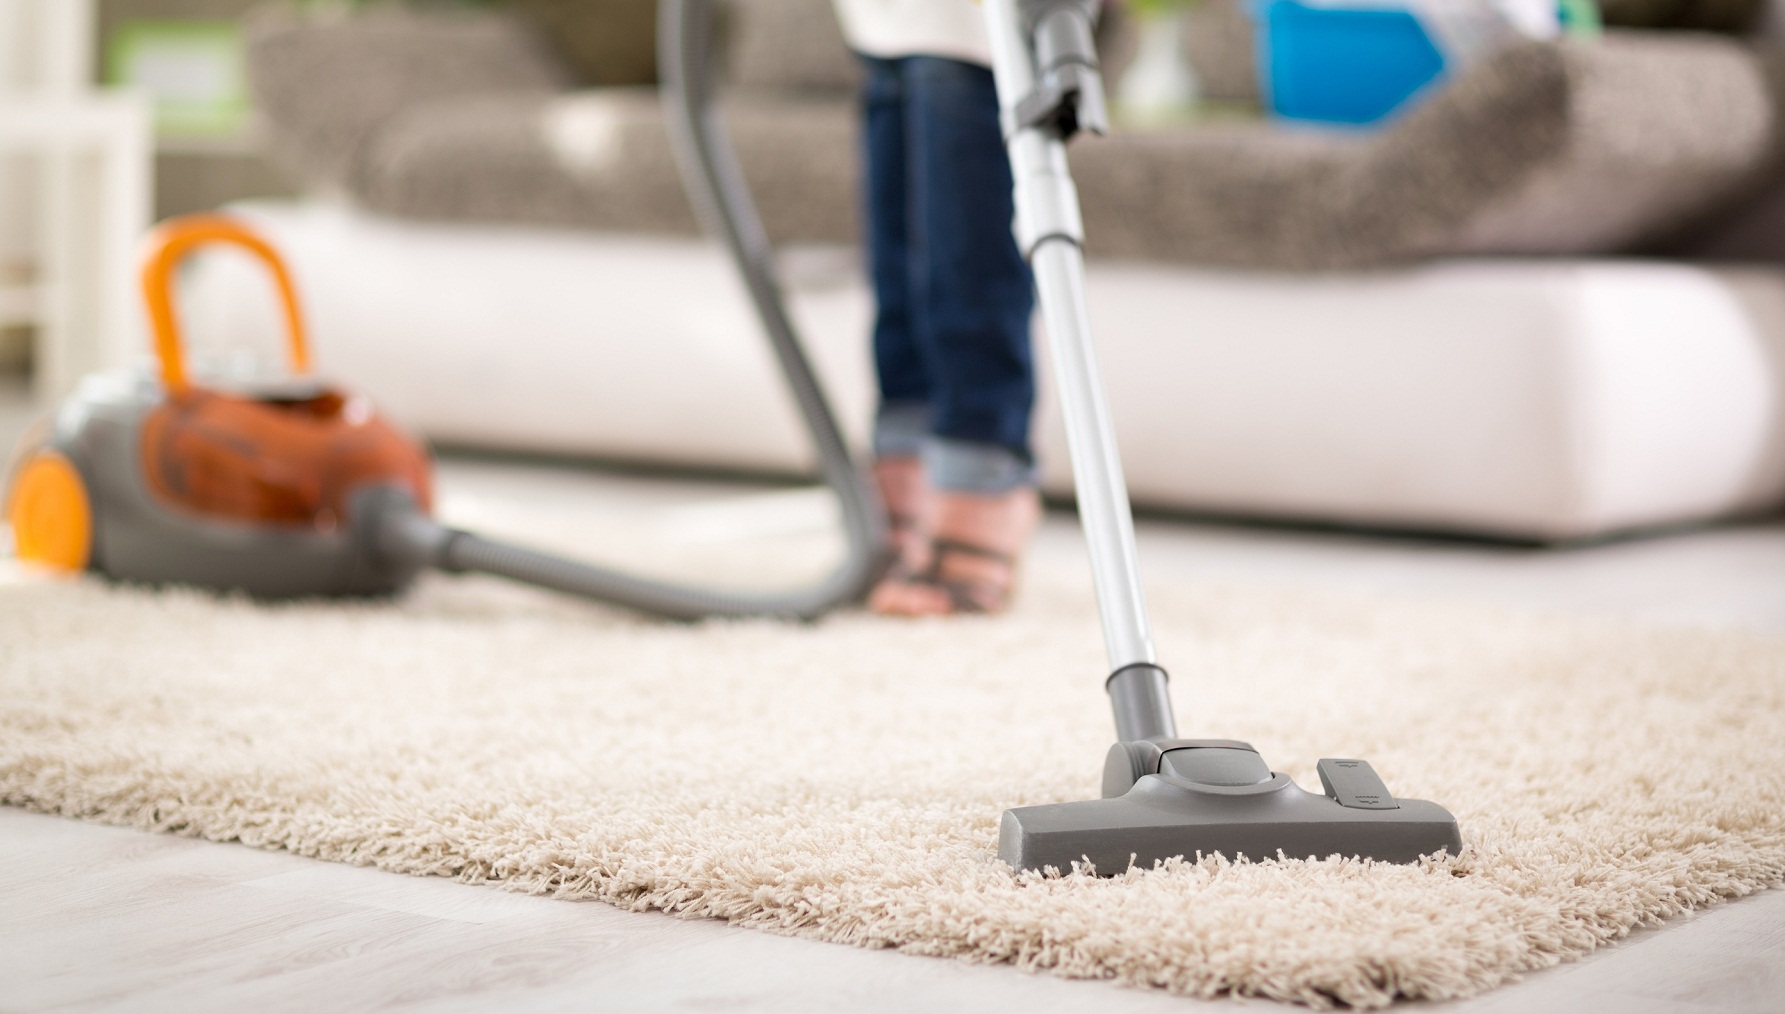 Bagless Vacuum Cleaners vs. Bagged Vacuum Cleaners: Which Is the Better Choice?